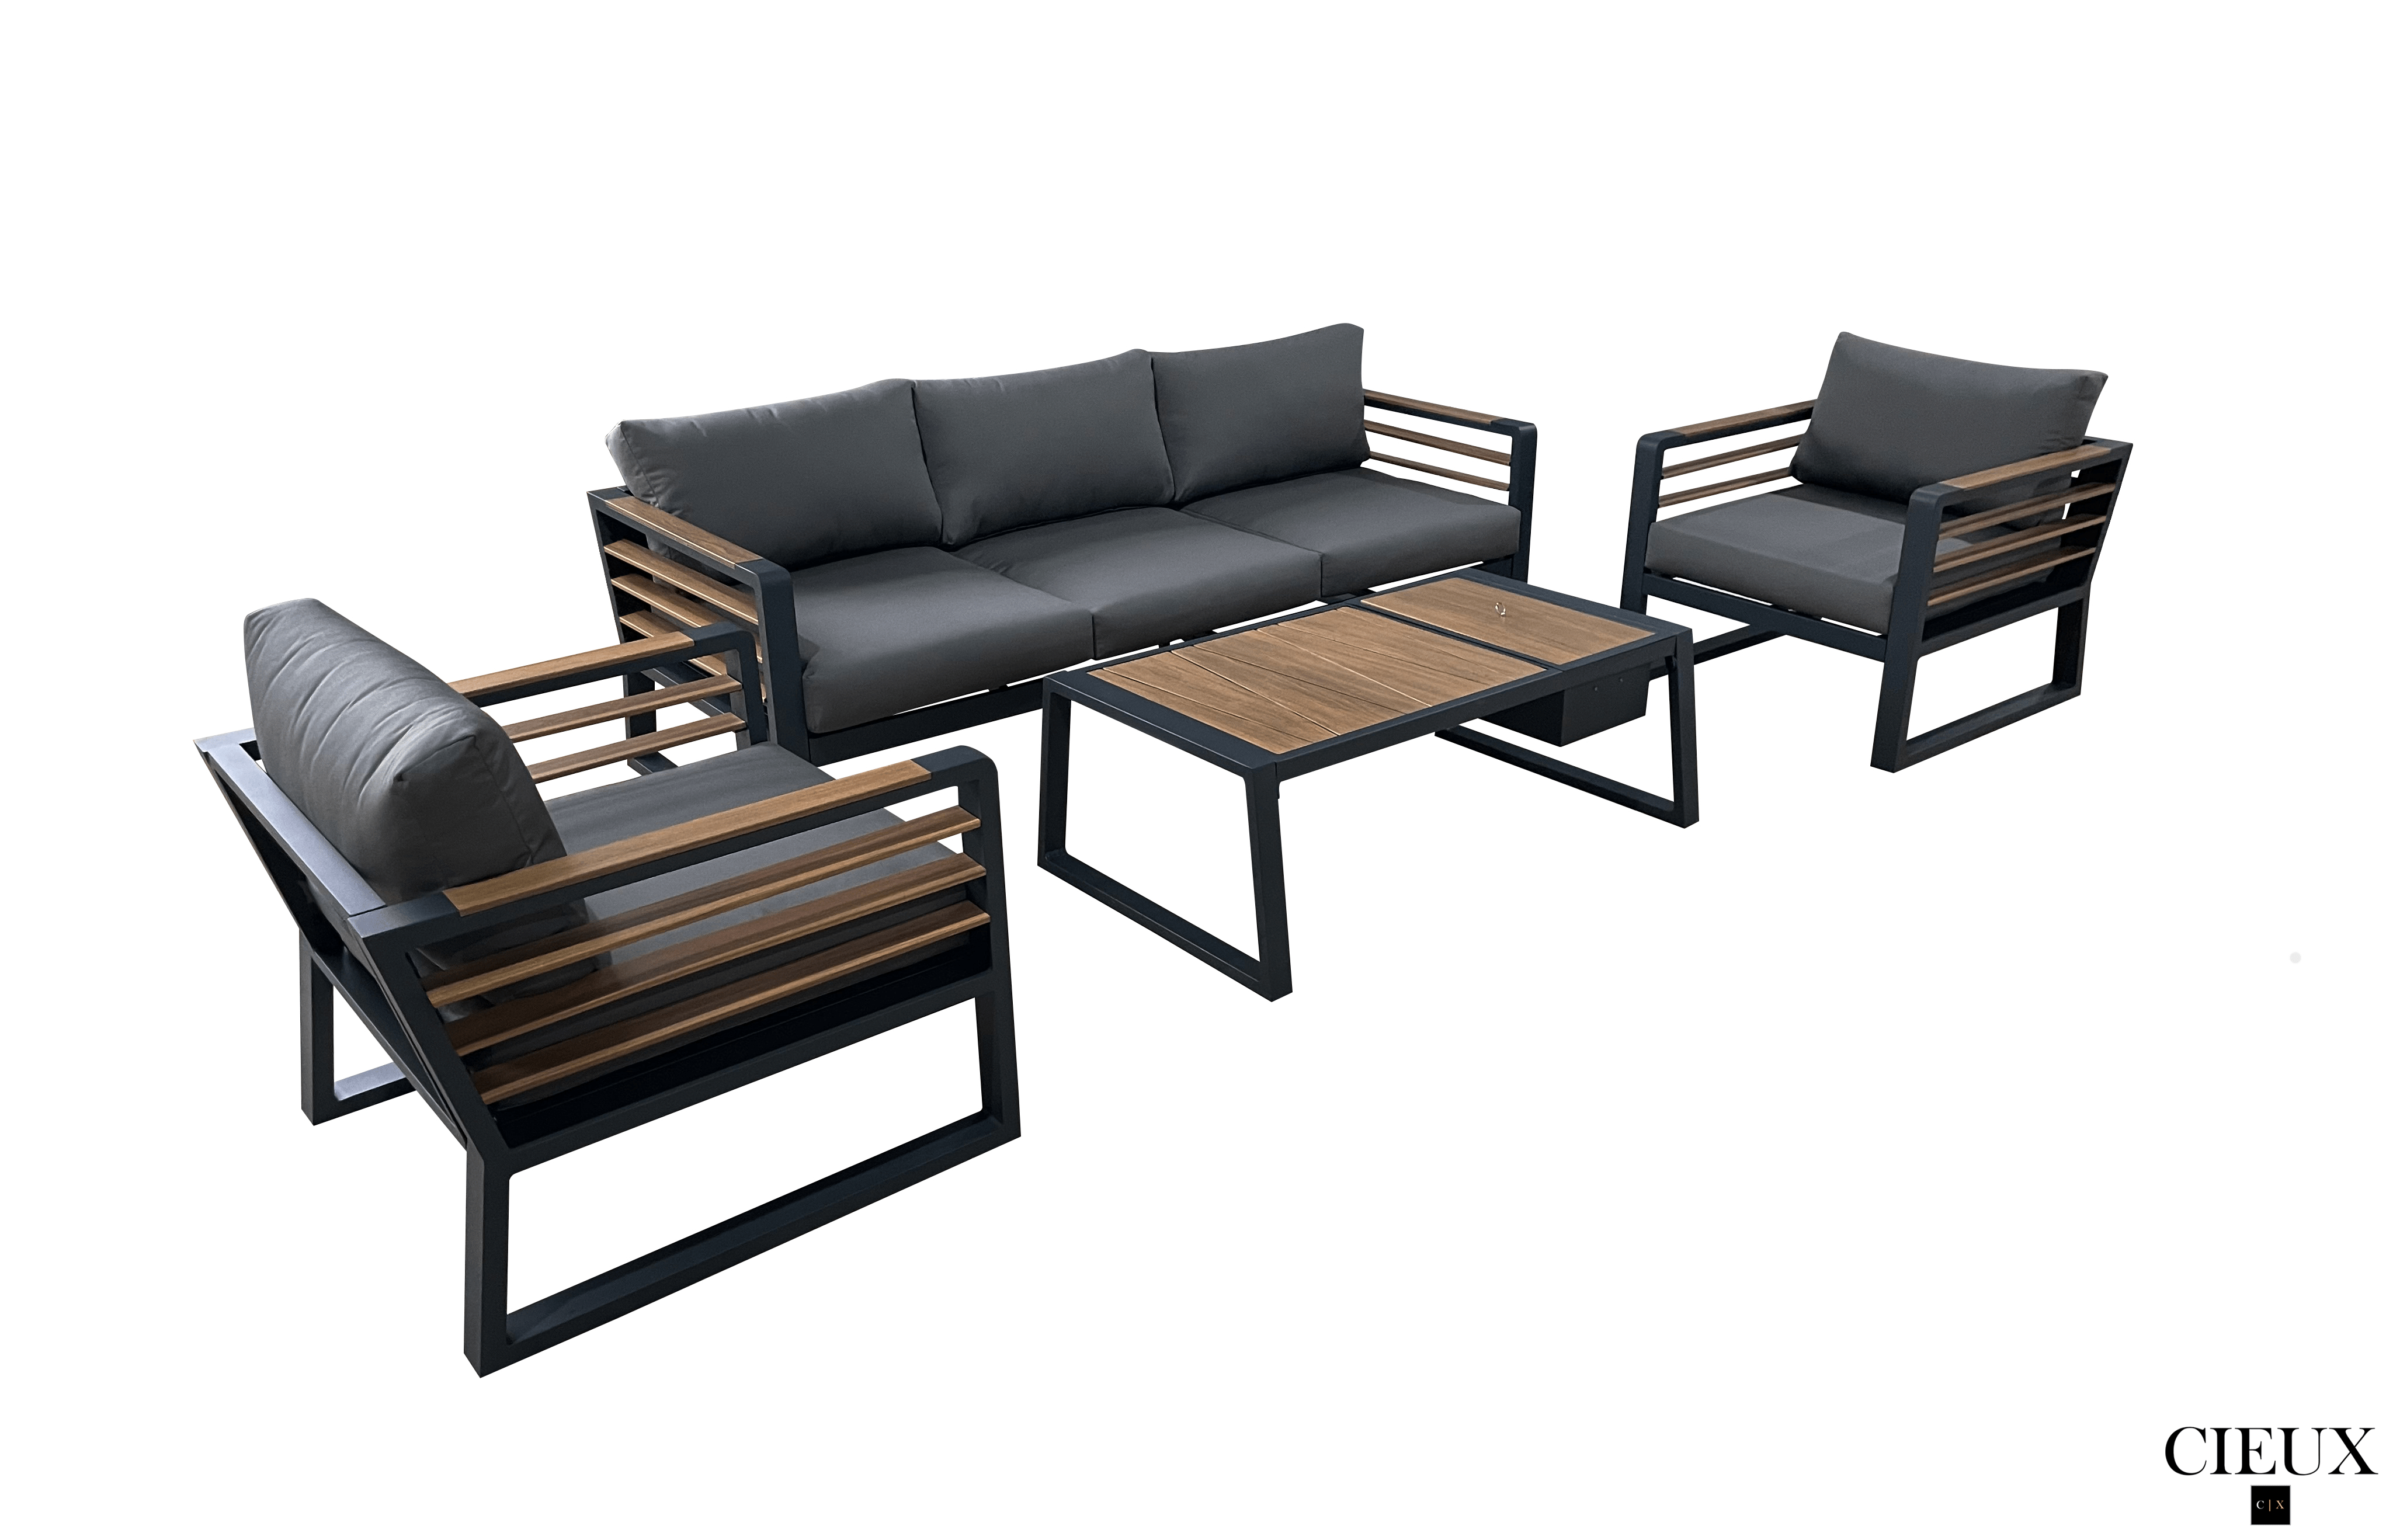 Pending - Cieux Avignon Outdoor Patio Aluminum Metal Sofa Conversation Set in Black with Sunbrella Cushions - Available in 2 Colours